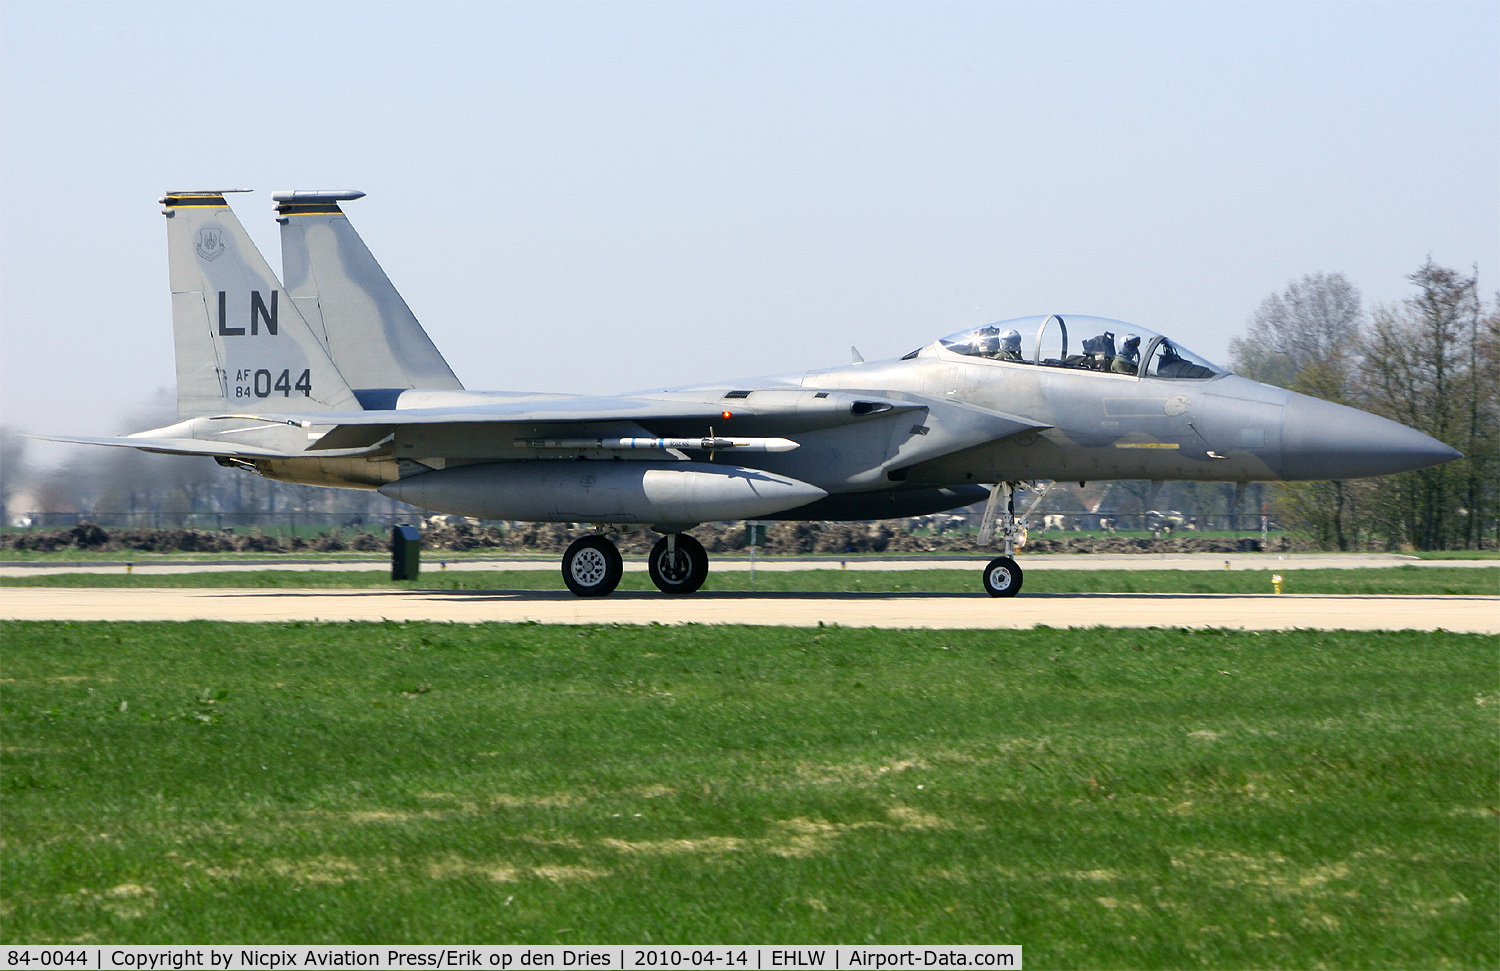 84-0044, 1984 McDonnell Douglas F-15D Eagle C/N 0924/D052, USAFE participated also in Frisian Flag 2010; here is F-15D 84-0044 of RAF Lakenheaths'  48 FW to be seen on the runway of Leeuwarden AB, The Netherlands